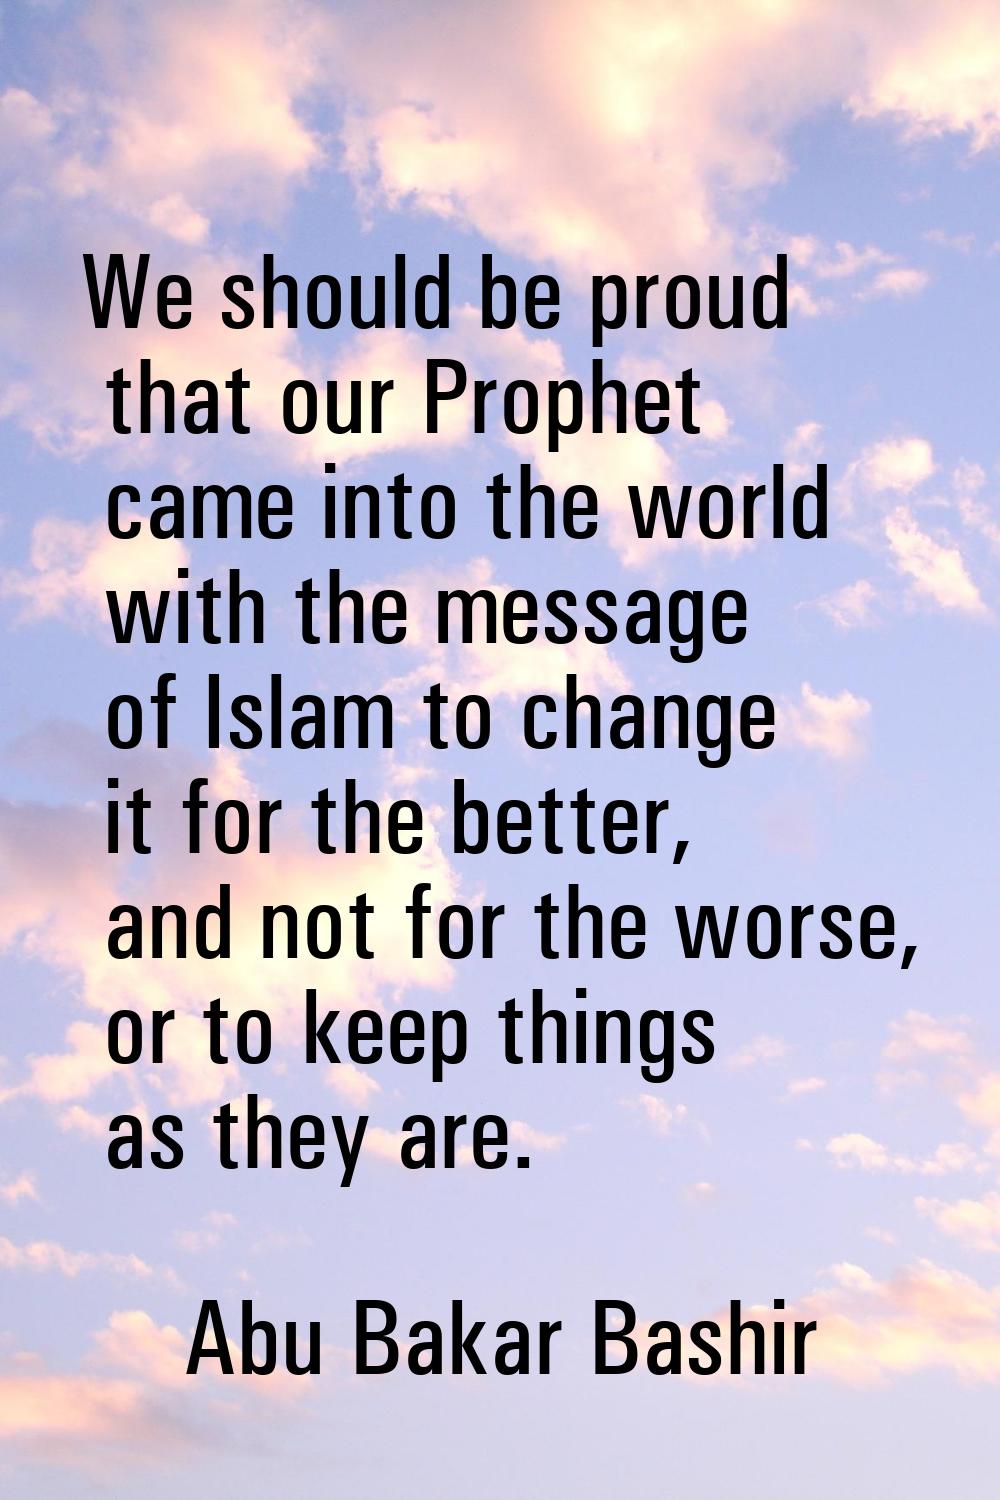 We should be proud that our Prophet came into the world with the message of Islam to change it for 